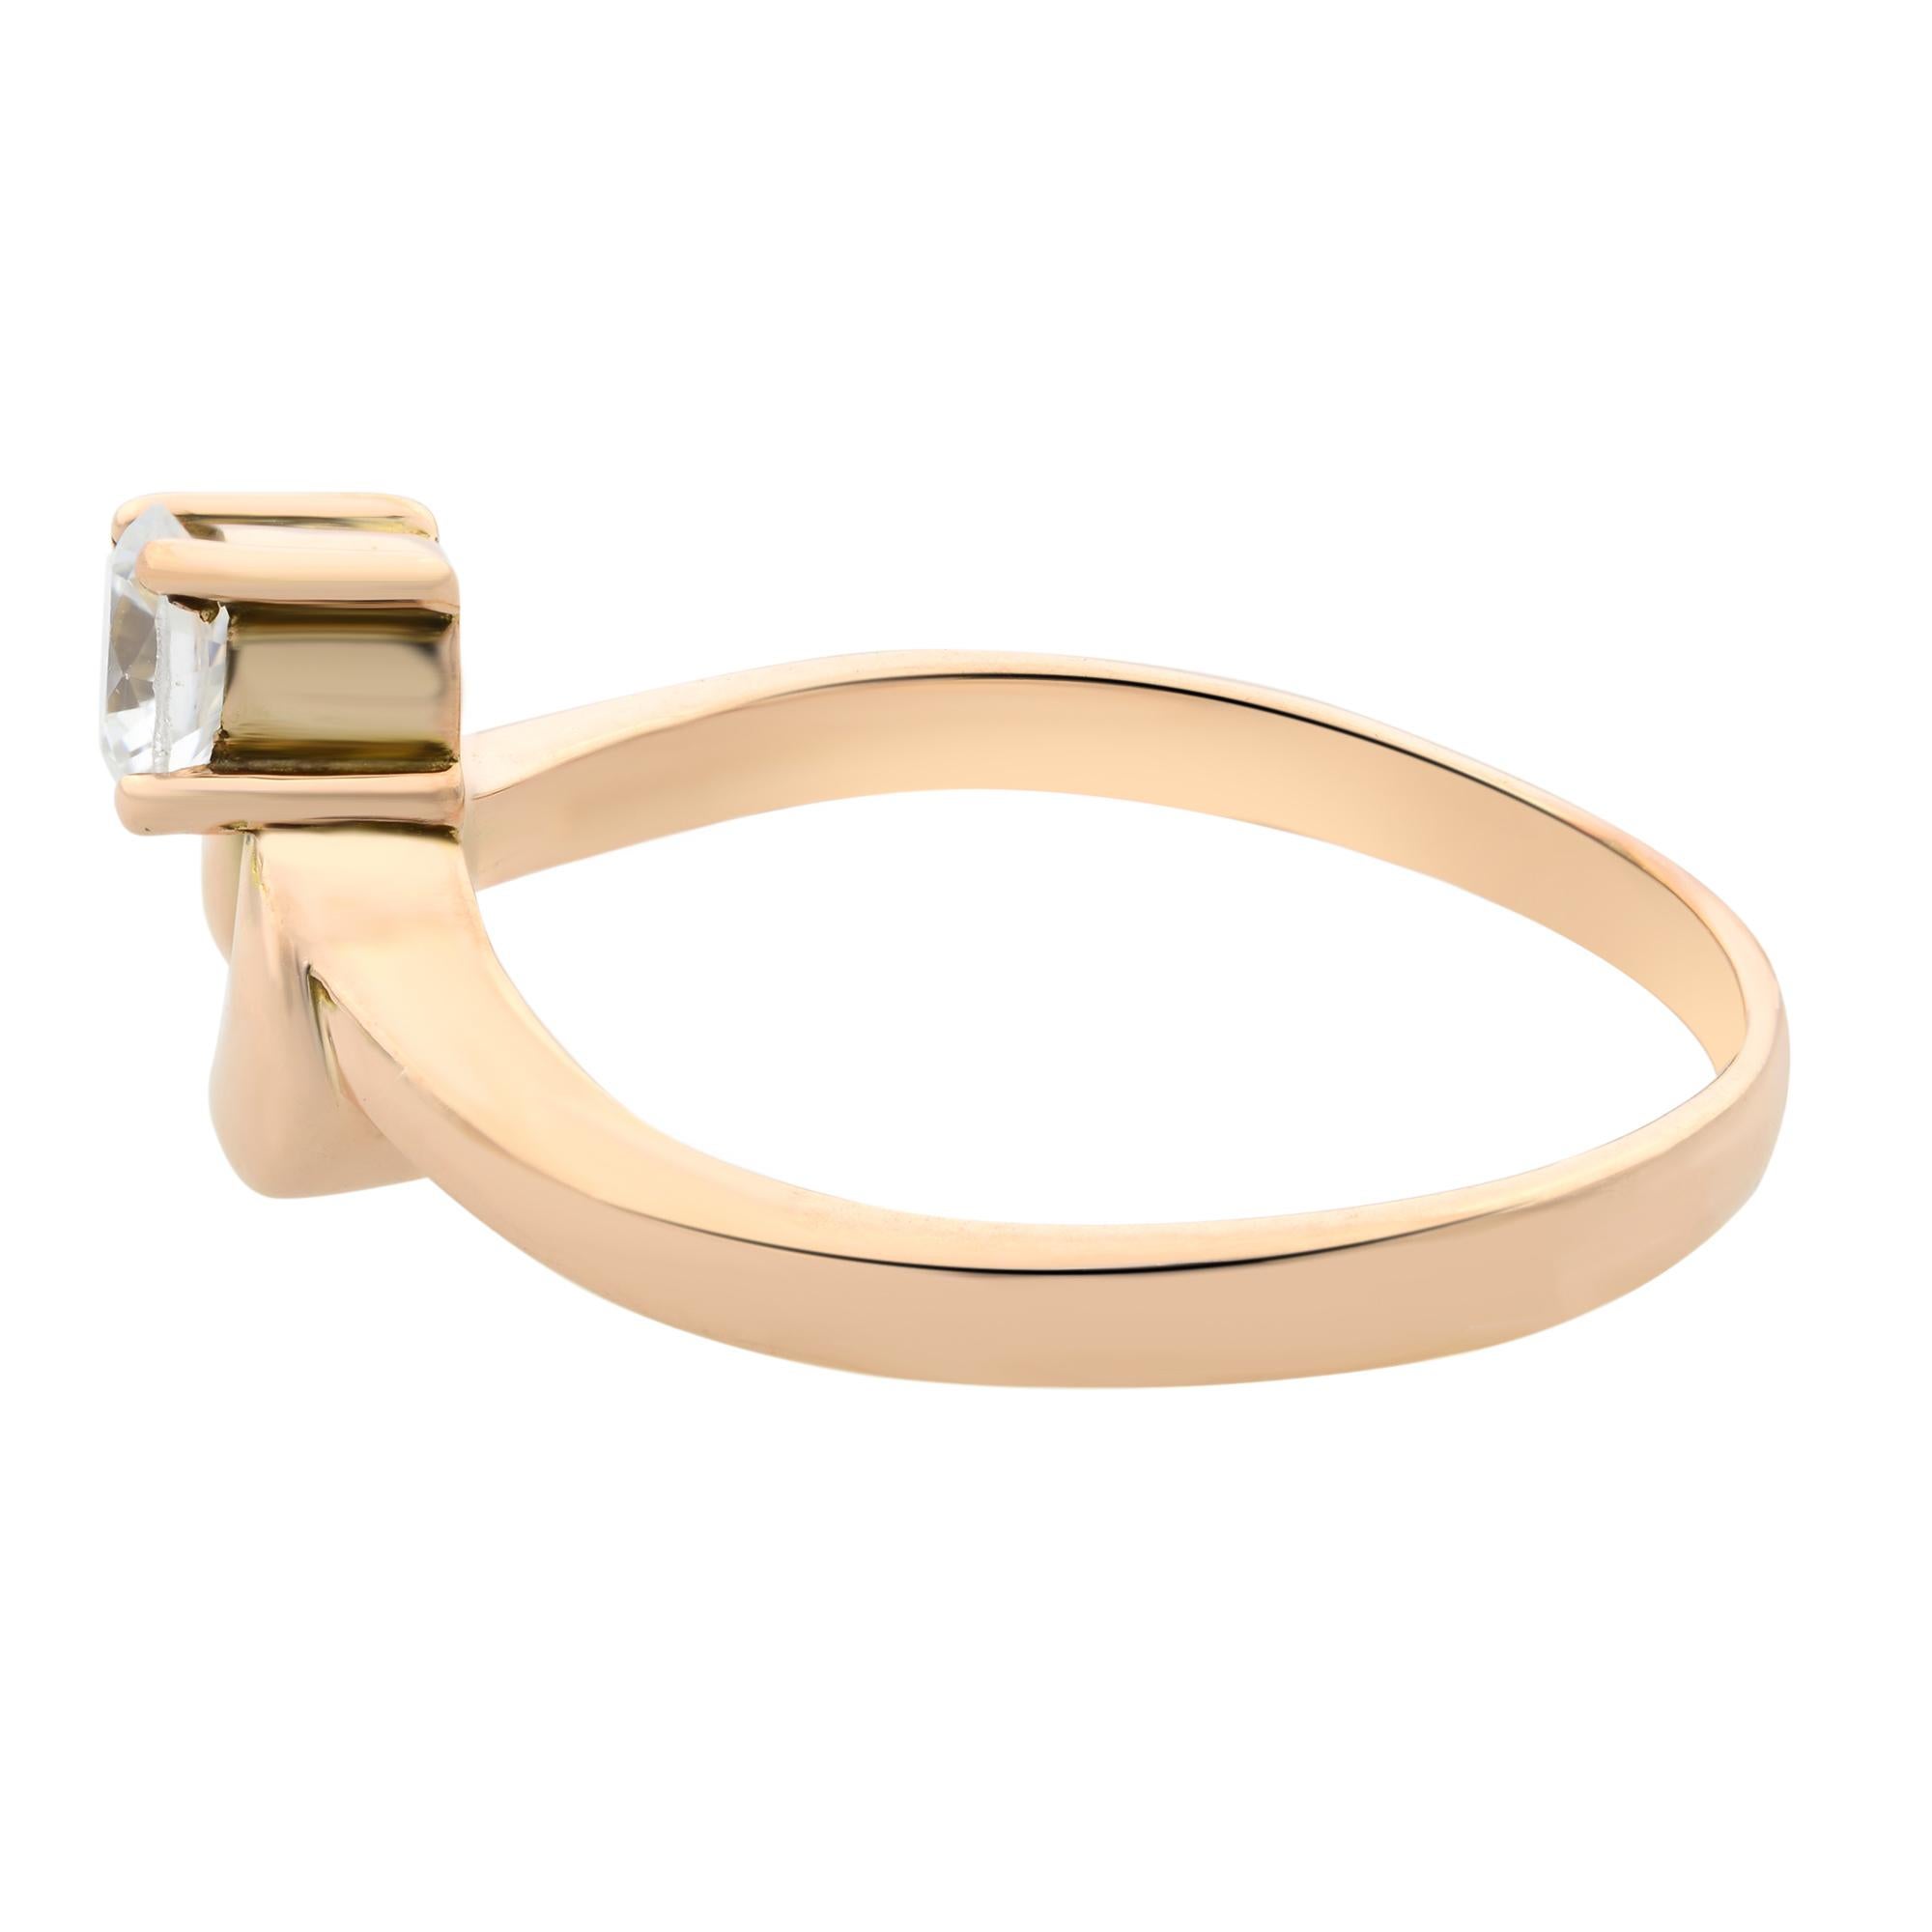 Rachel Koen 0.15Cttw Round Cut CZ Ladies Ring 14K Rose Gold Size 7 In Excellent Condition For Sale In New York, NY